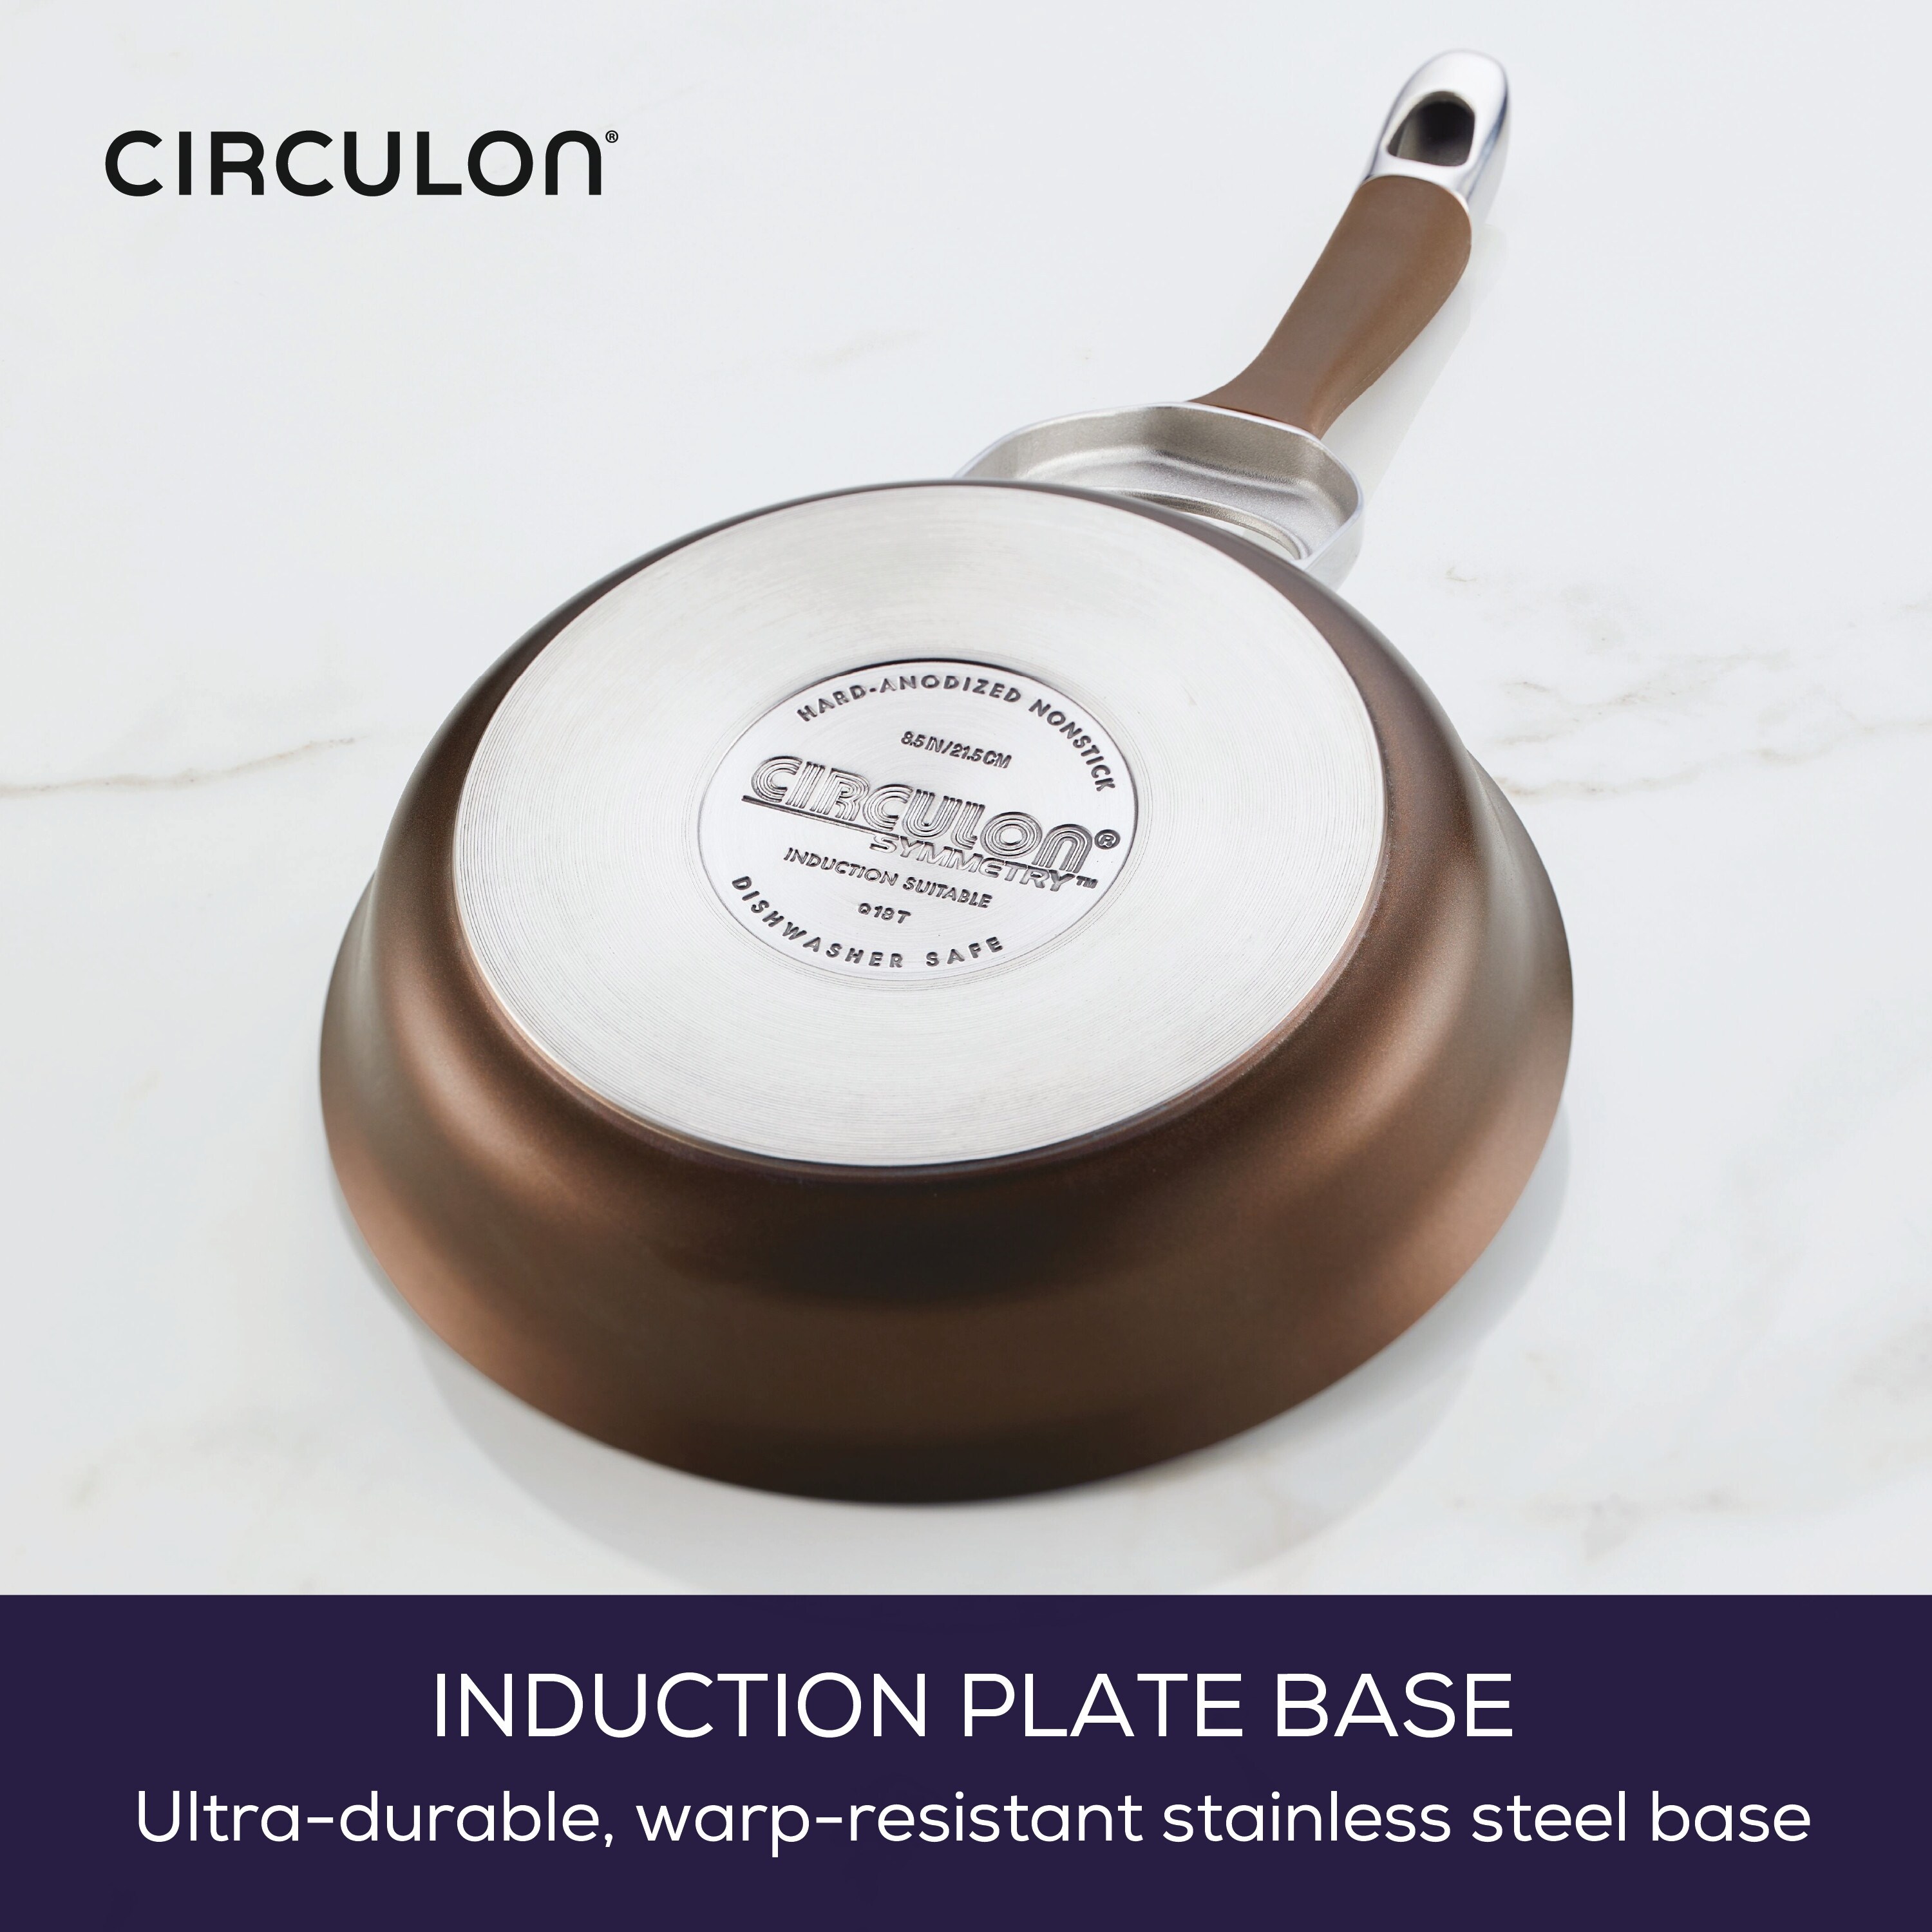 https://ak1.ostkcdn.com/images/products/is/images/direct/0f911305998d251a540cedd403fdd77694b86d90/Circulon-Symmetry-Hard-Anodized-Nonstick-Induction-Frying-Pan%2C-8.5-Inch%2C-Chocolate.jpg